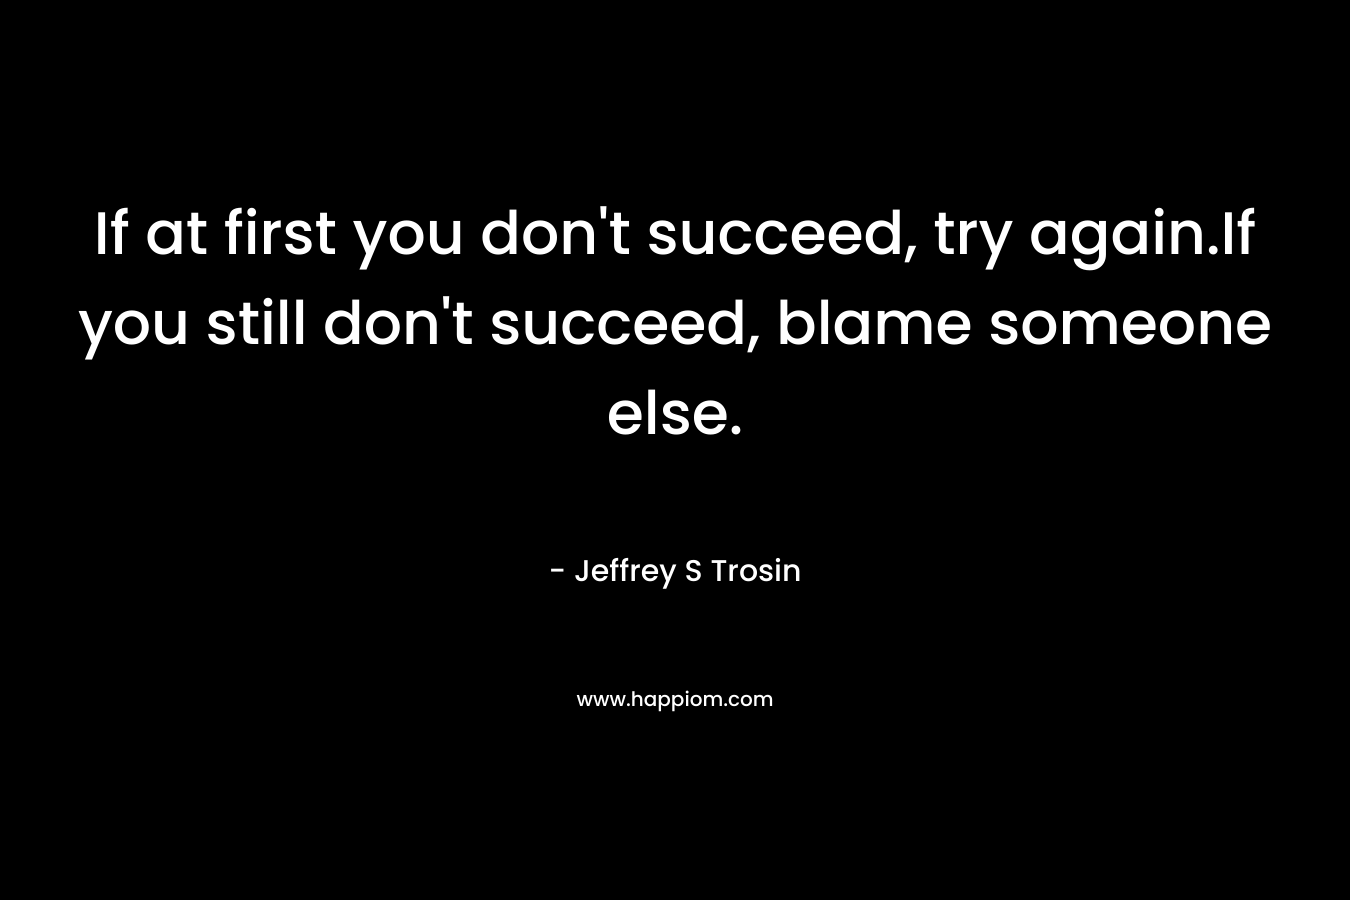 If at first you don't succeed, try again.If you still don't succeed, blame someone else.